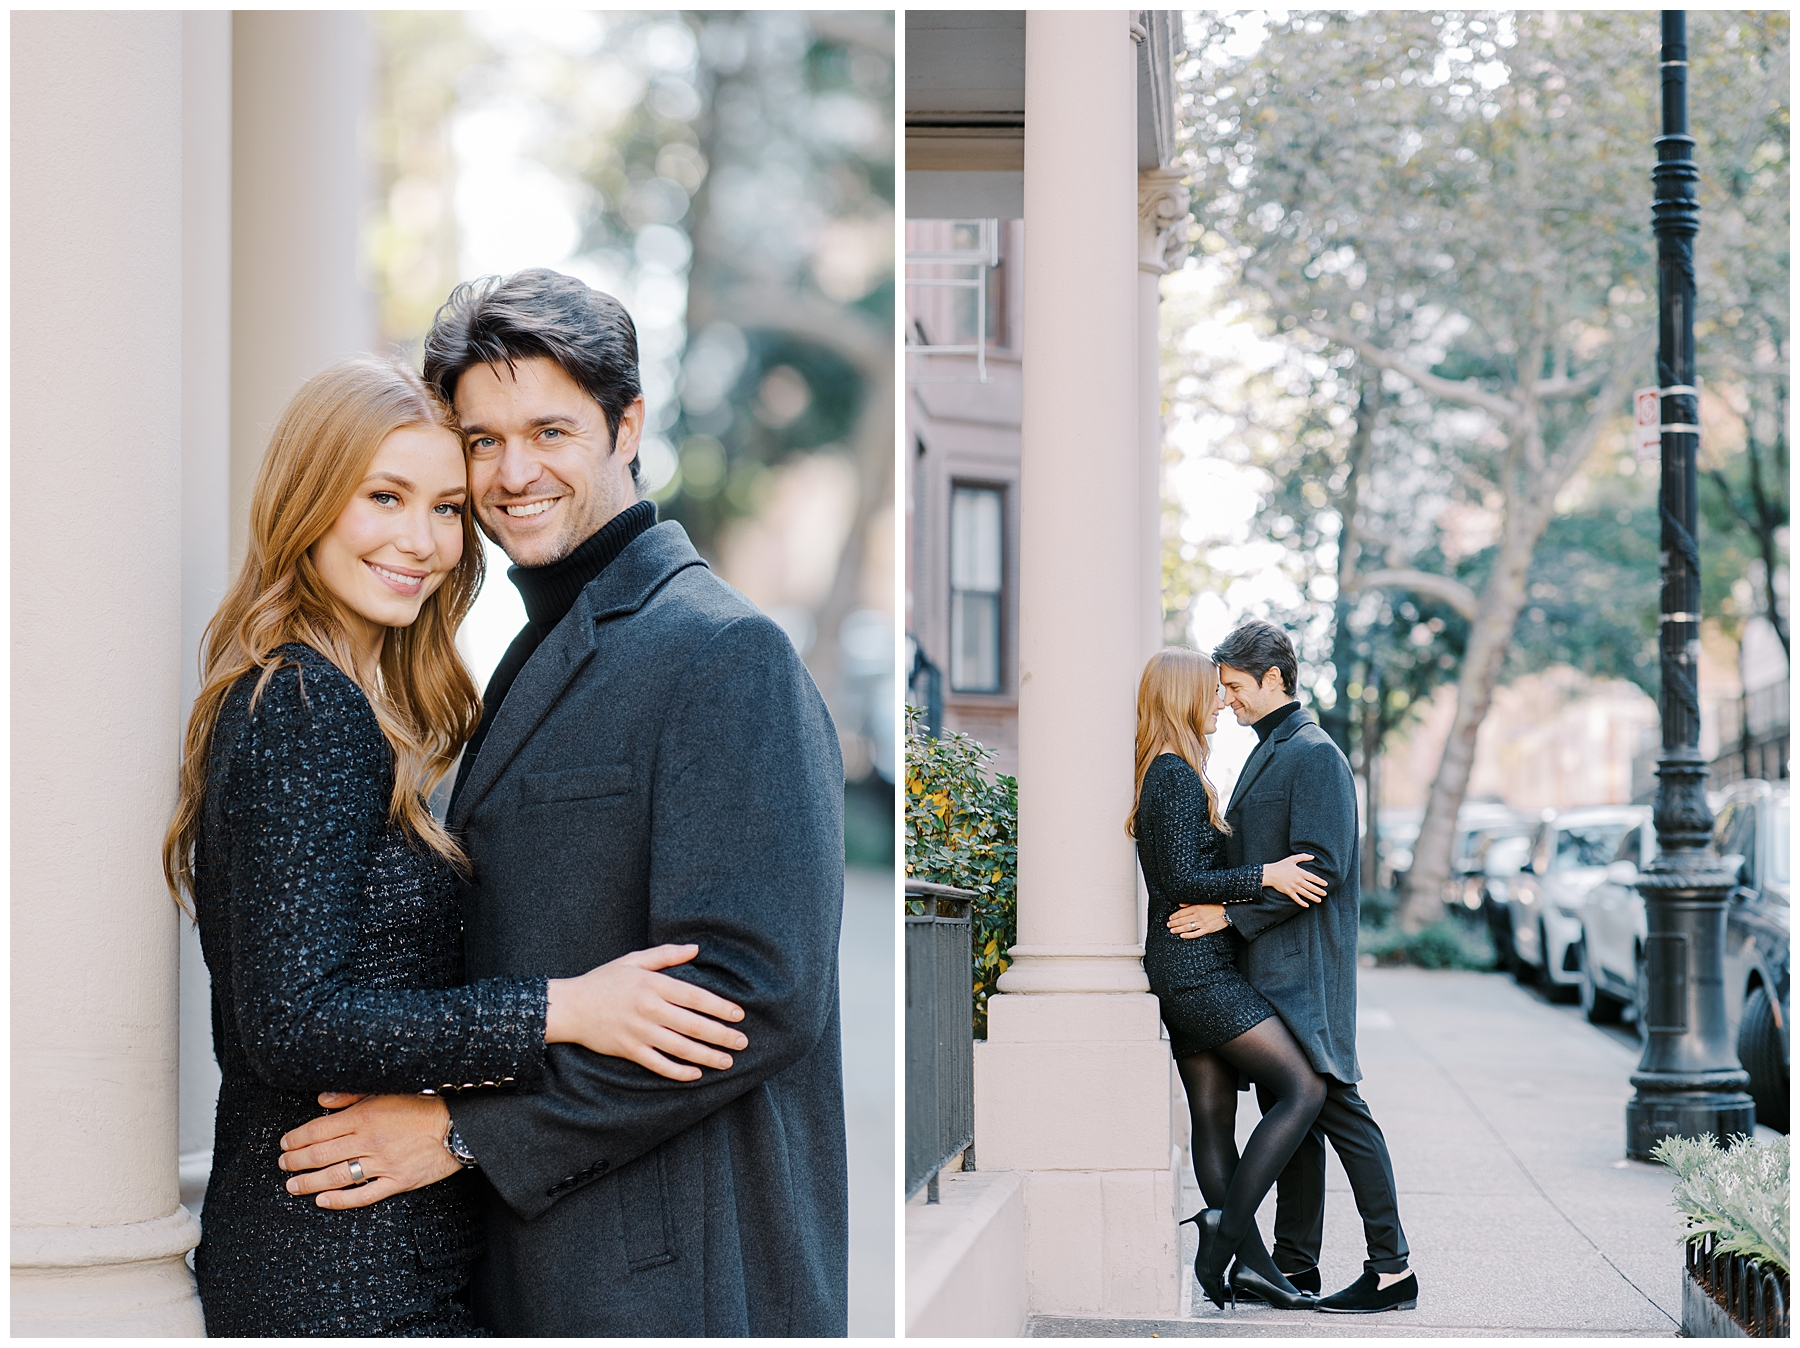 Timeless NYC engagement